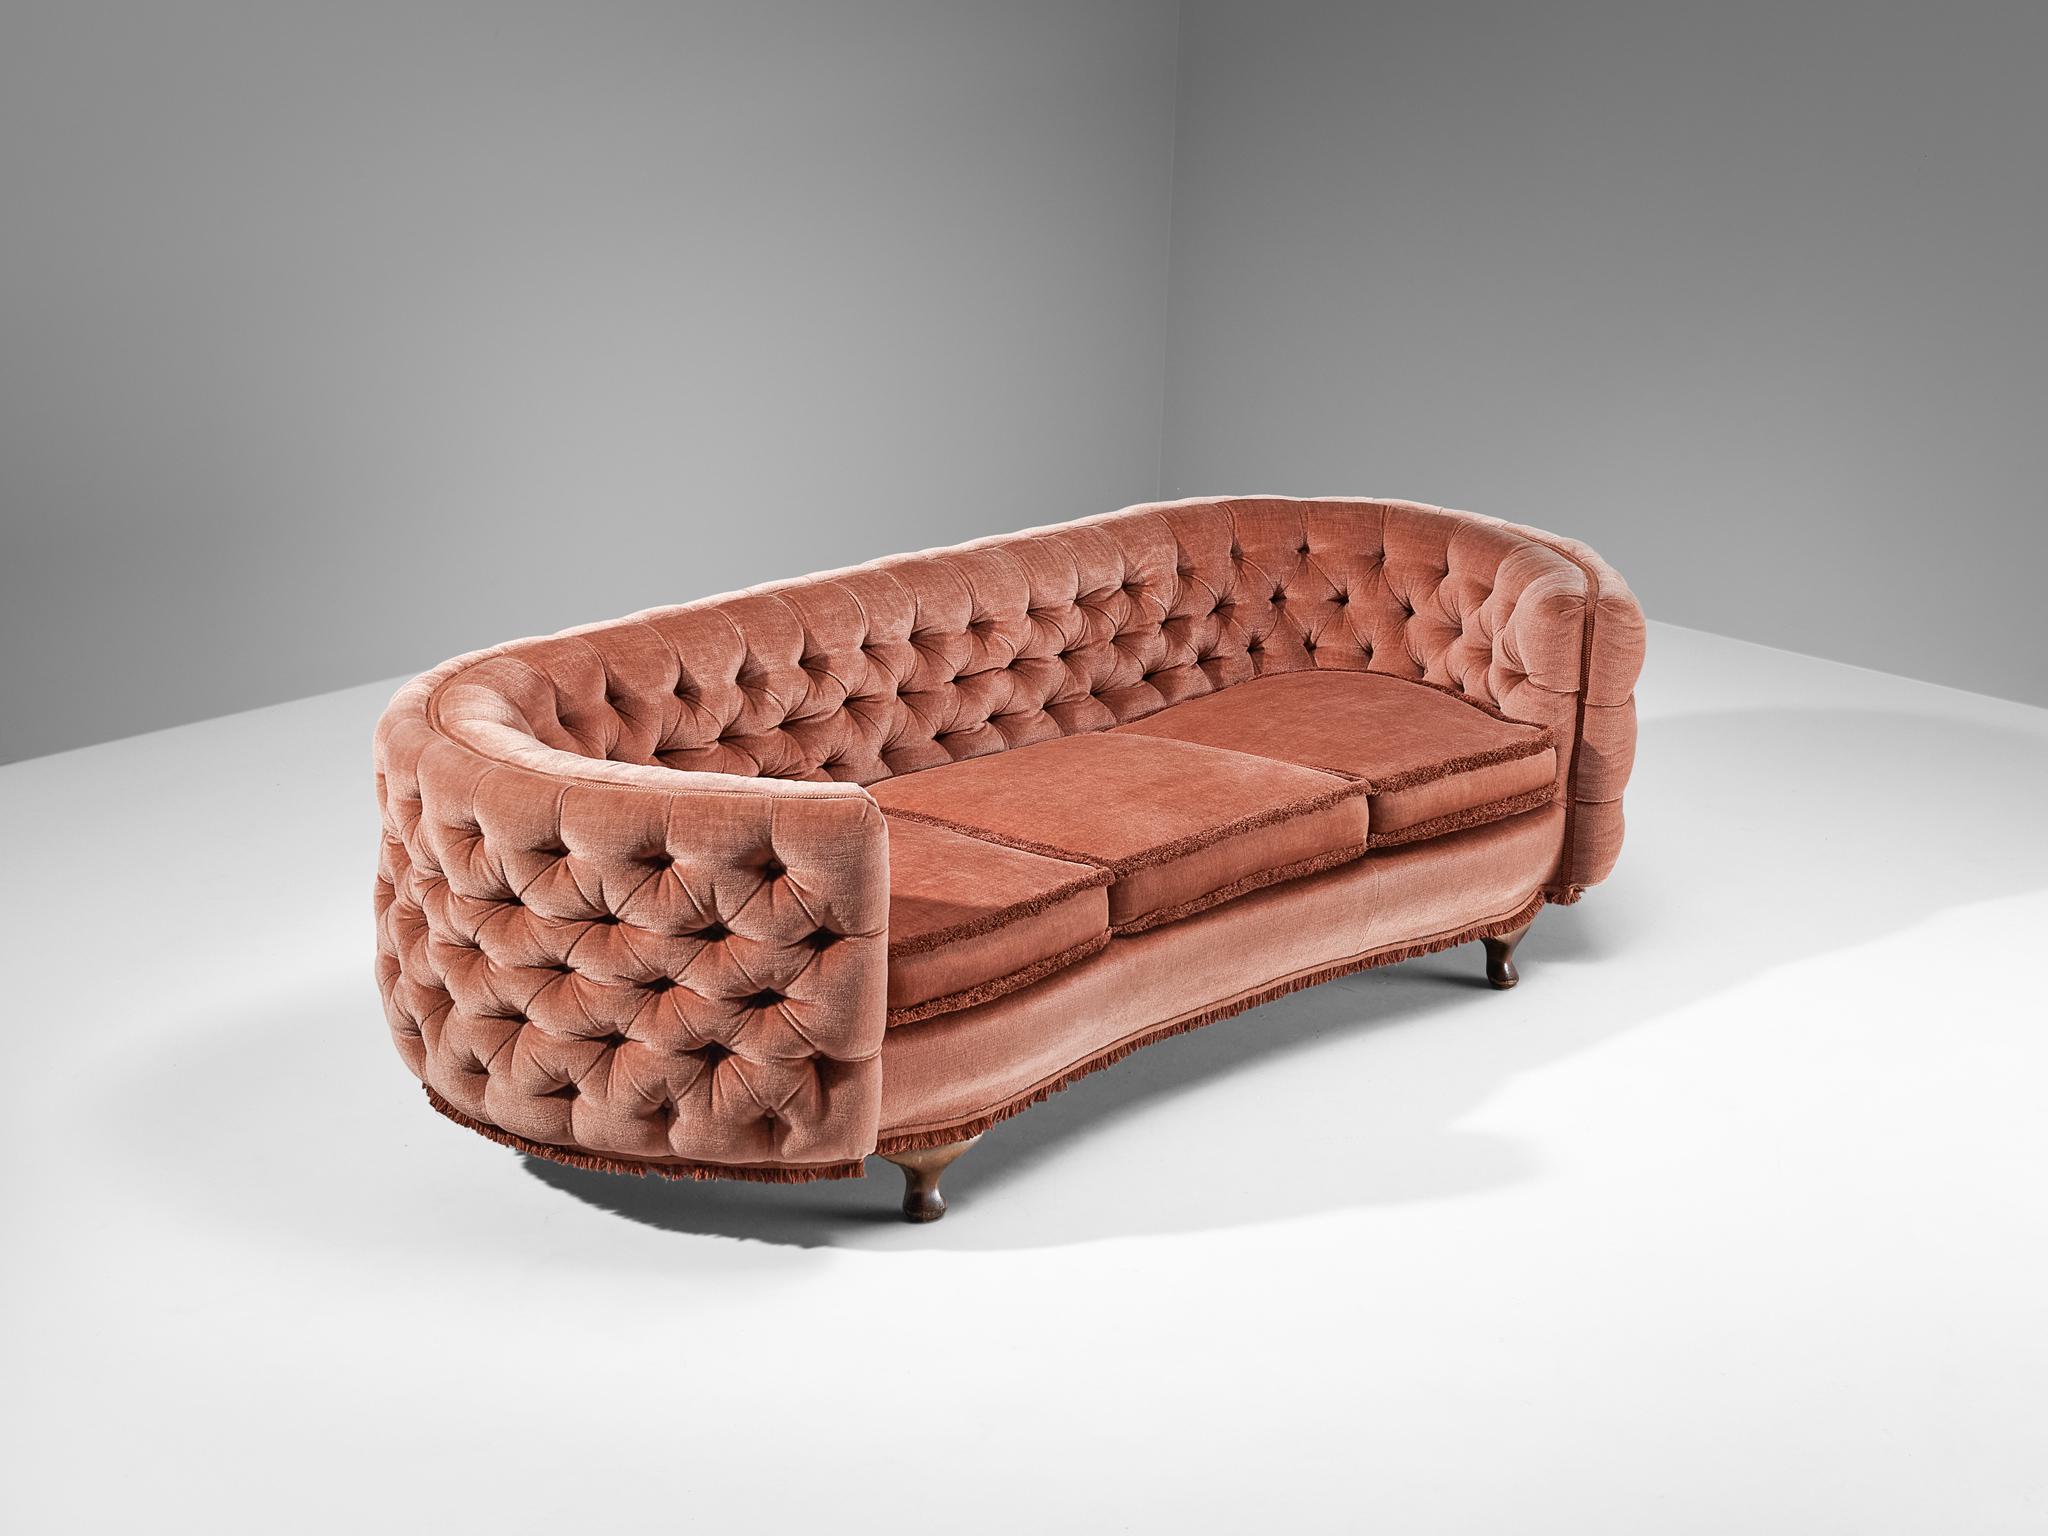 Sofa, mohair, stained beech, France, 1960s

This baroque-inspired sofa of French origin features a a voluptuous body with delicate lines and decorative accents. The luxurious and chic appearance of the sofa is achieved through the use of soft pink